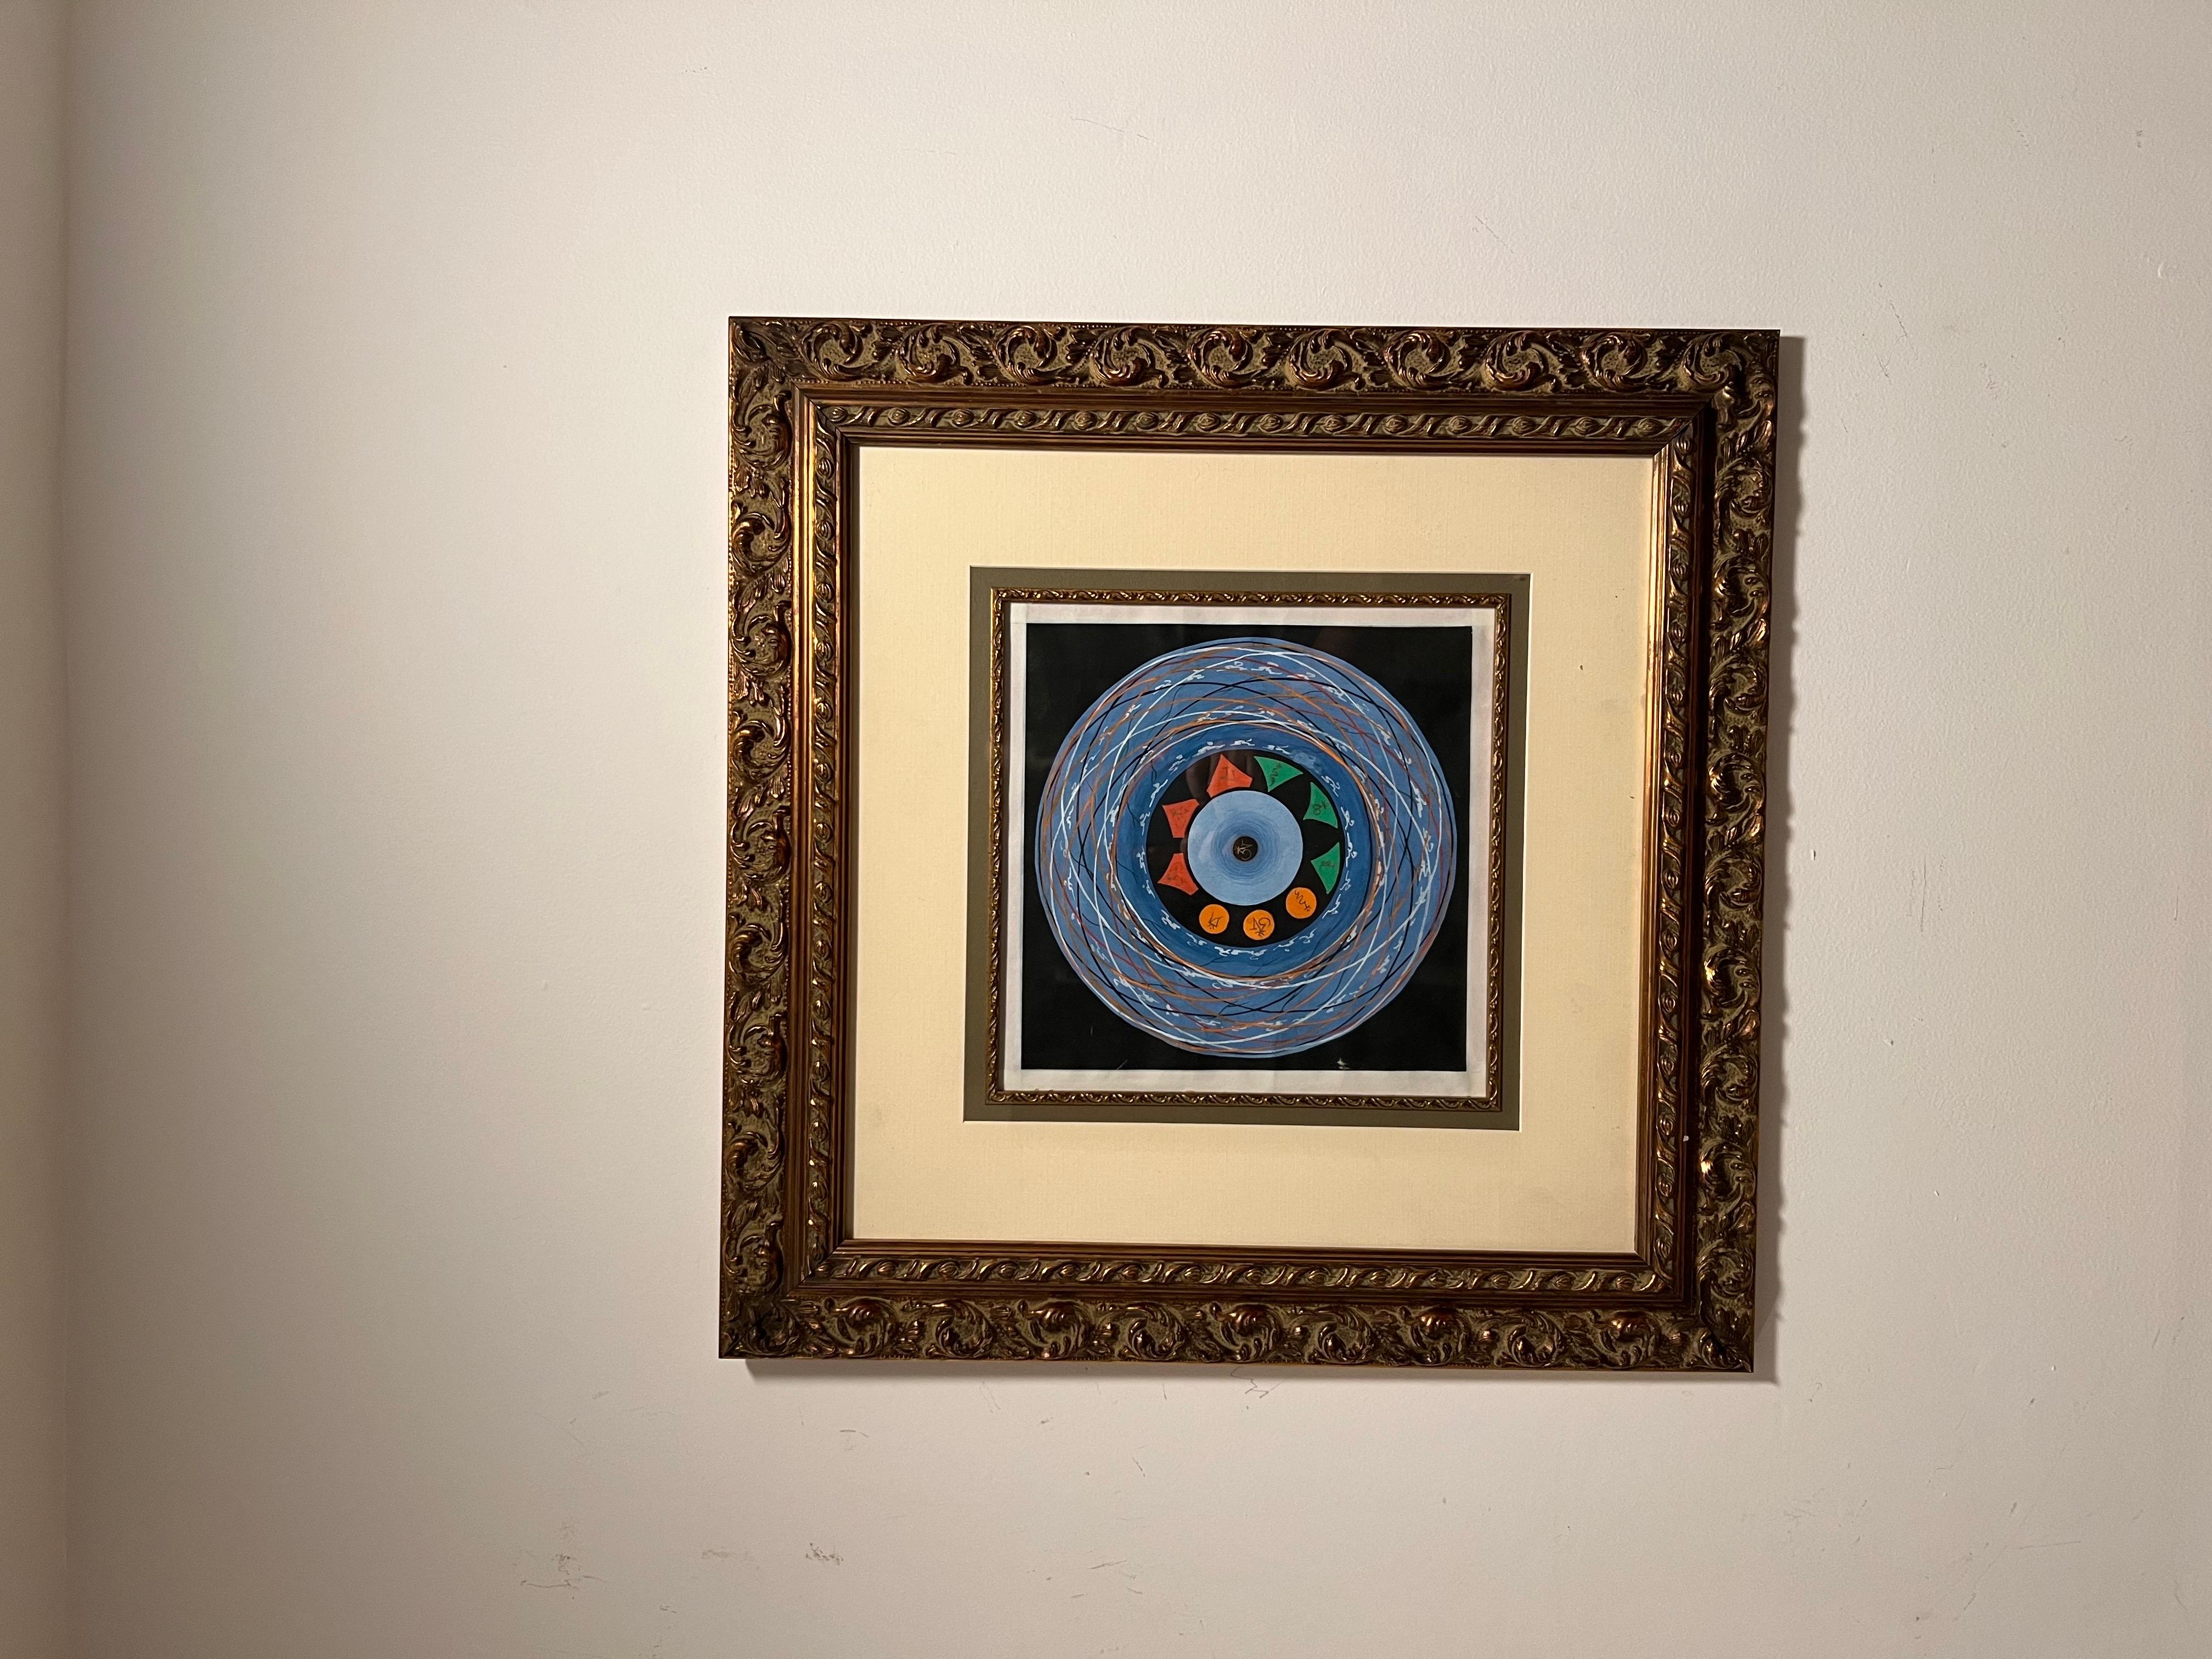 Thangka Painting of a Cosmos Mandala Thangka is great for meditation and transformation of our Mindy & Body. Using only Natural Stone Color and other natural pigments these kind of traditional sacred Buddhist art helps to realize the deeper meaning